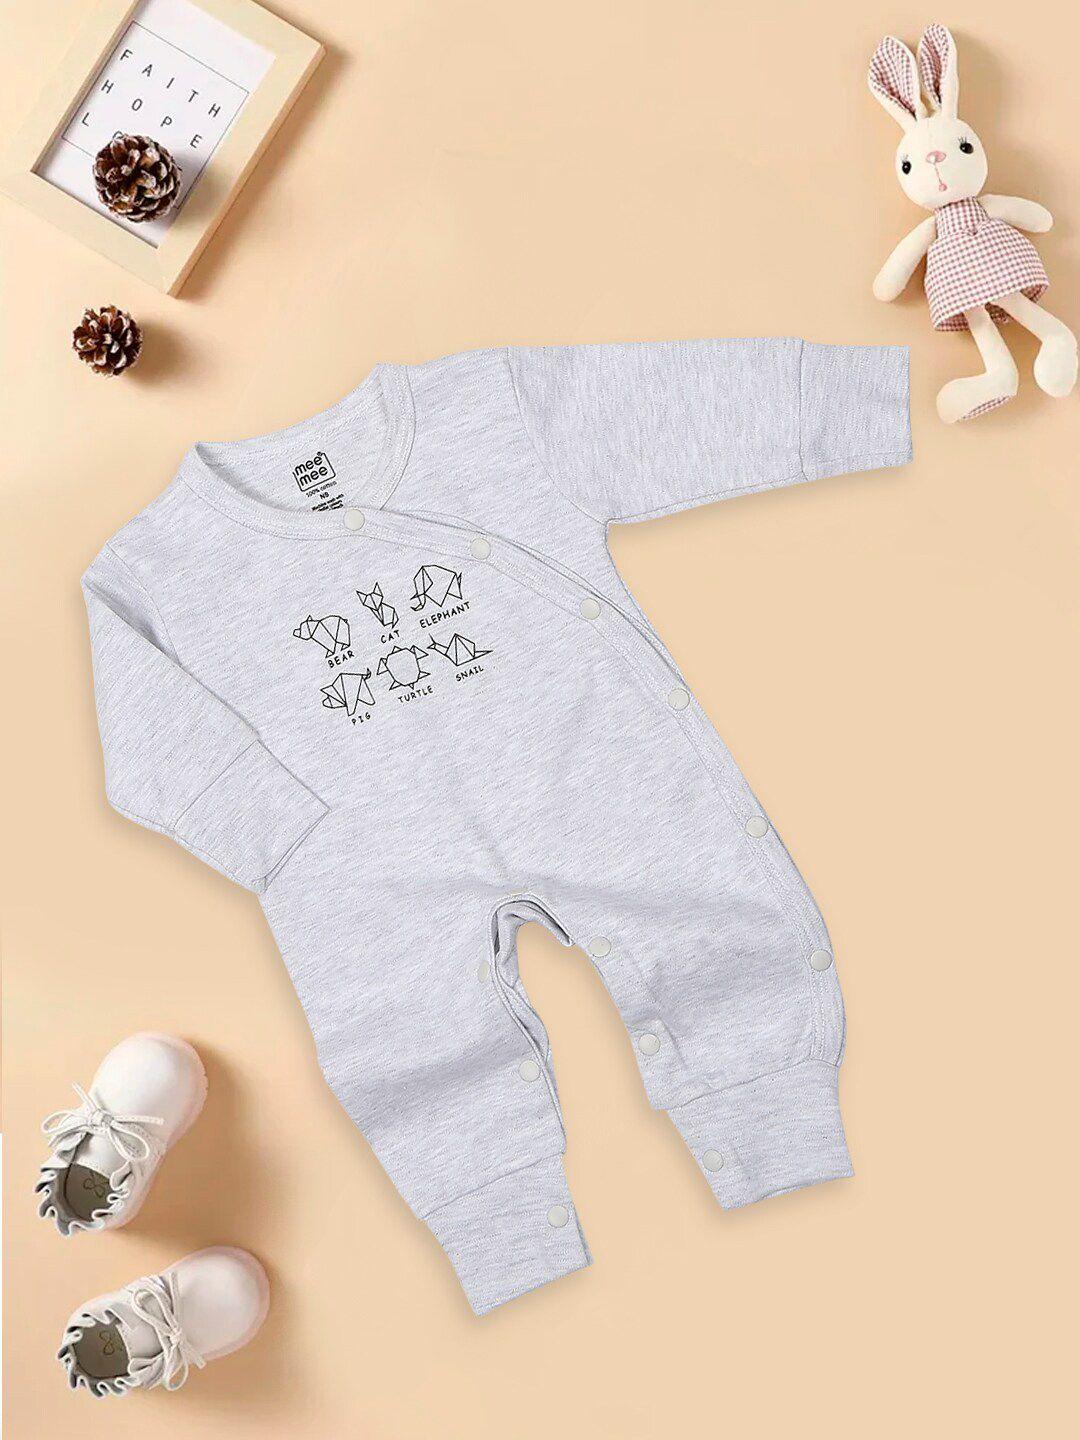 meemee infants printed pure cotton rompers